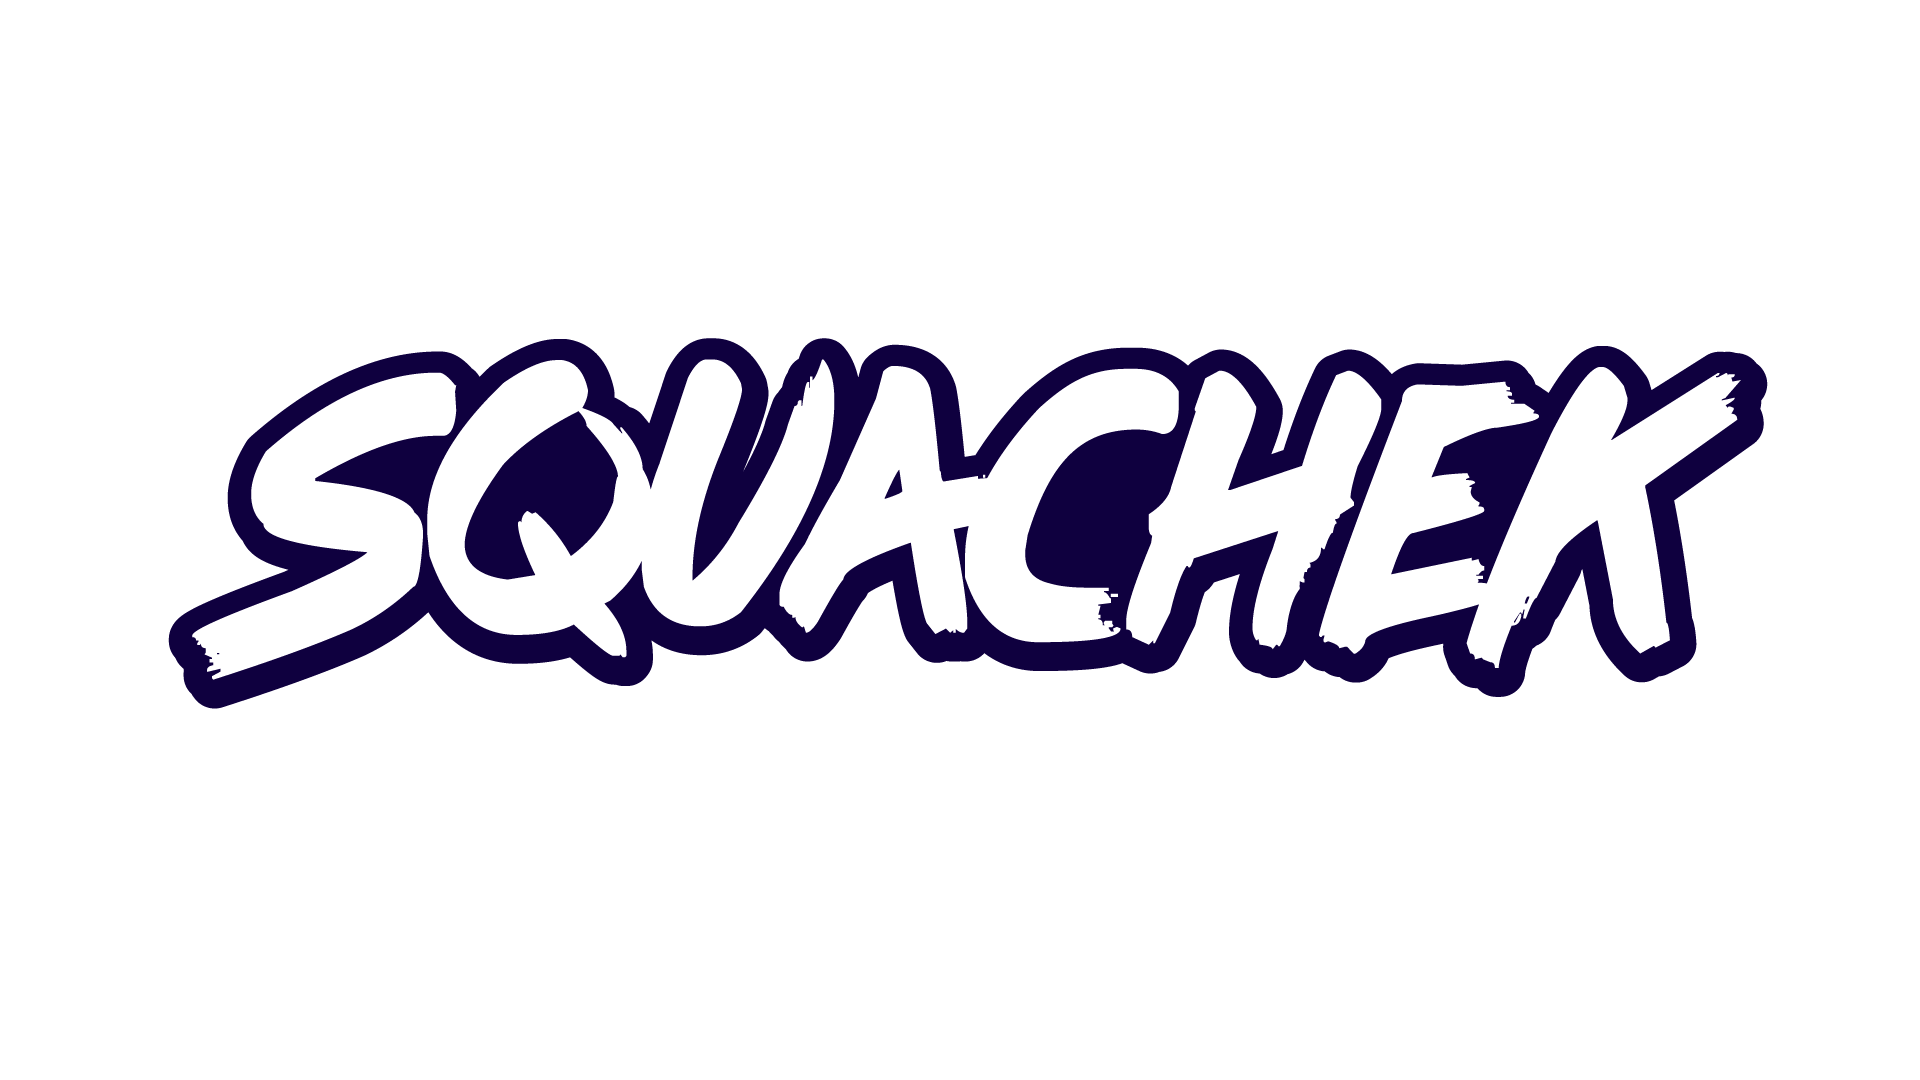 squachek - the only dj in the entire world®